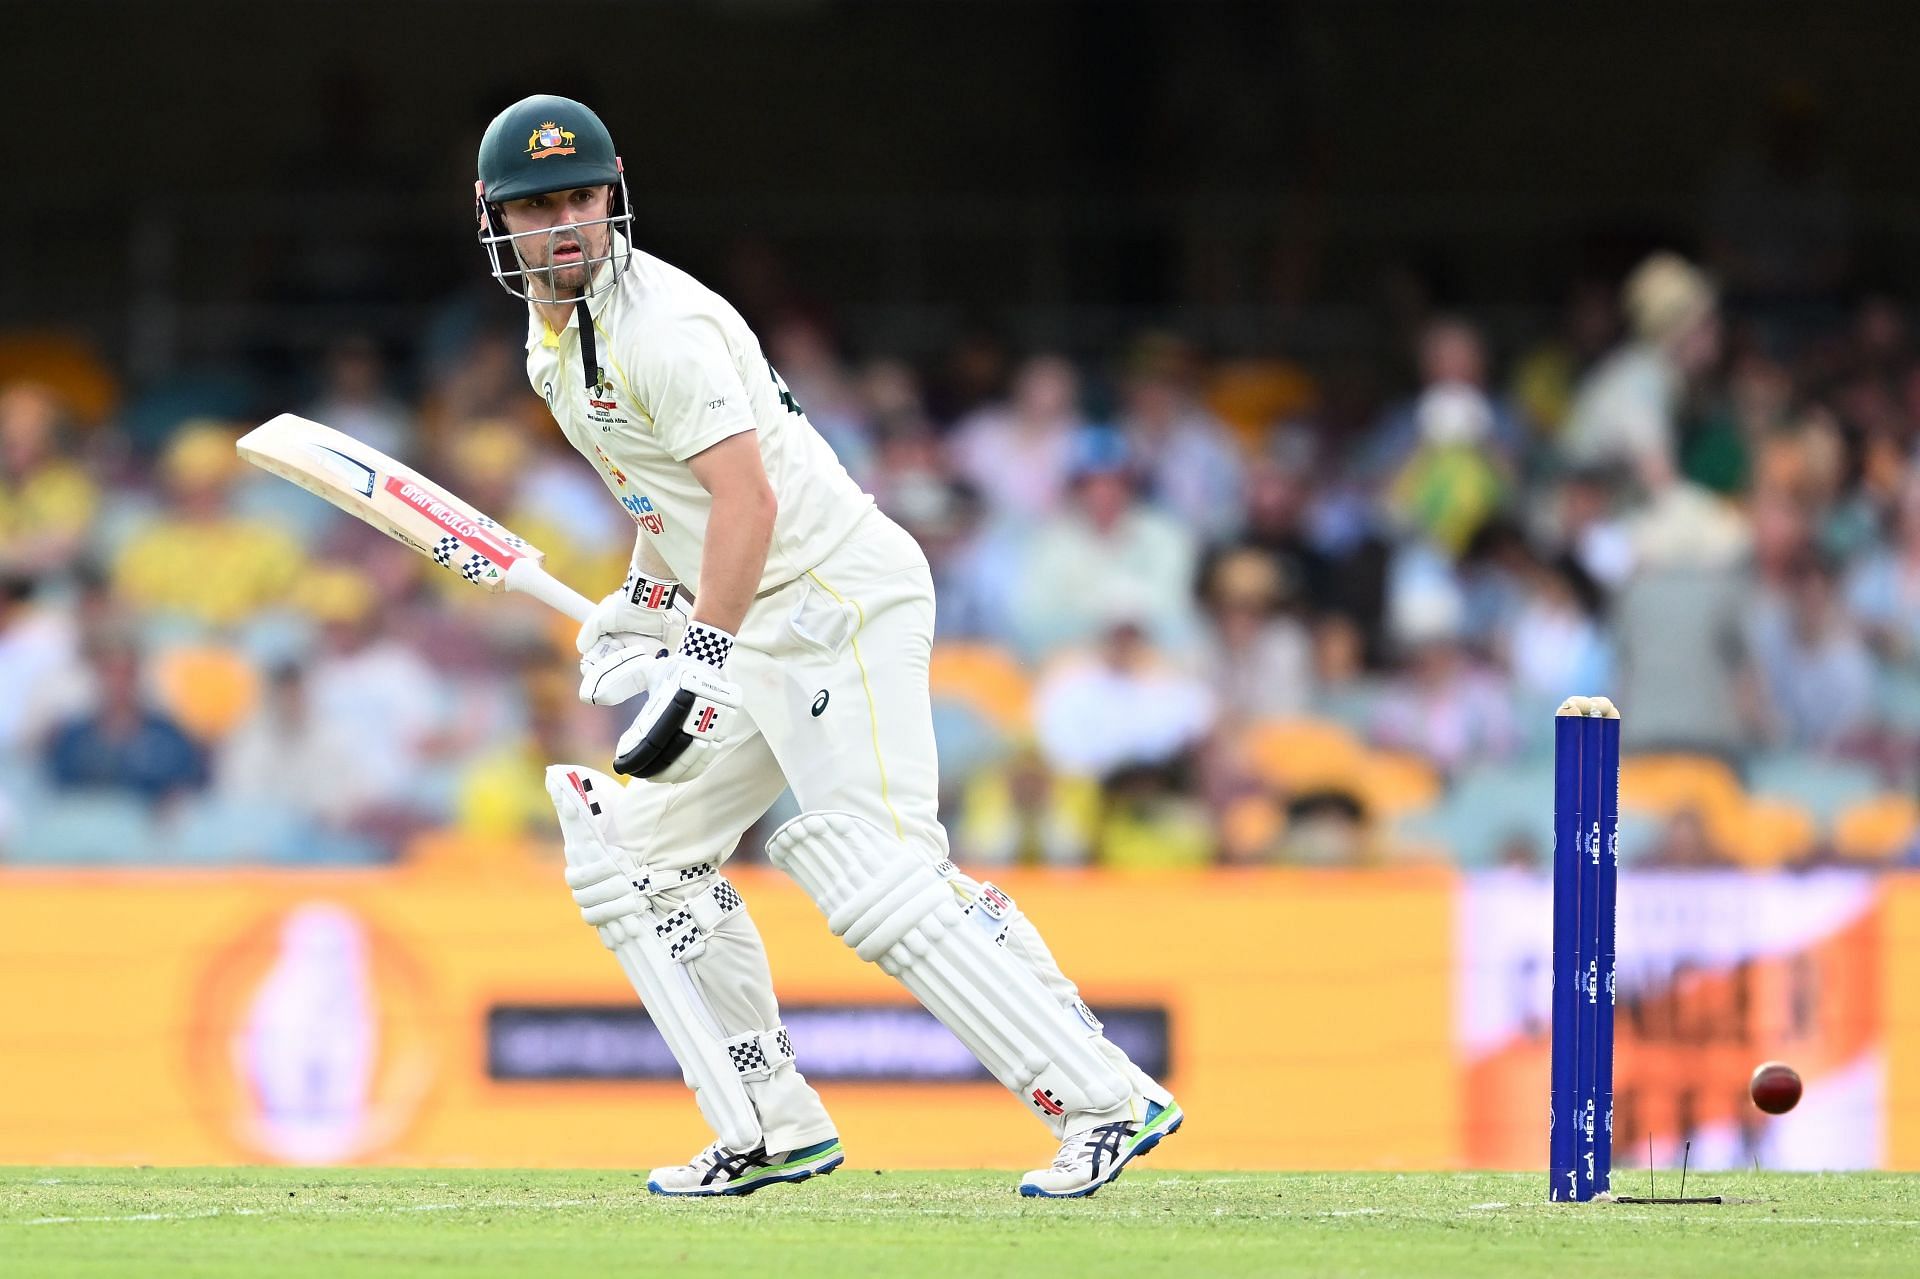 Travis Head played a free-flowing knock. (Image Credits: Getty)